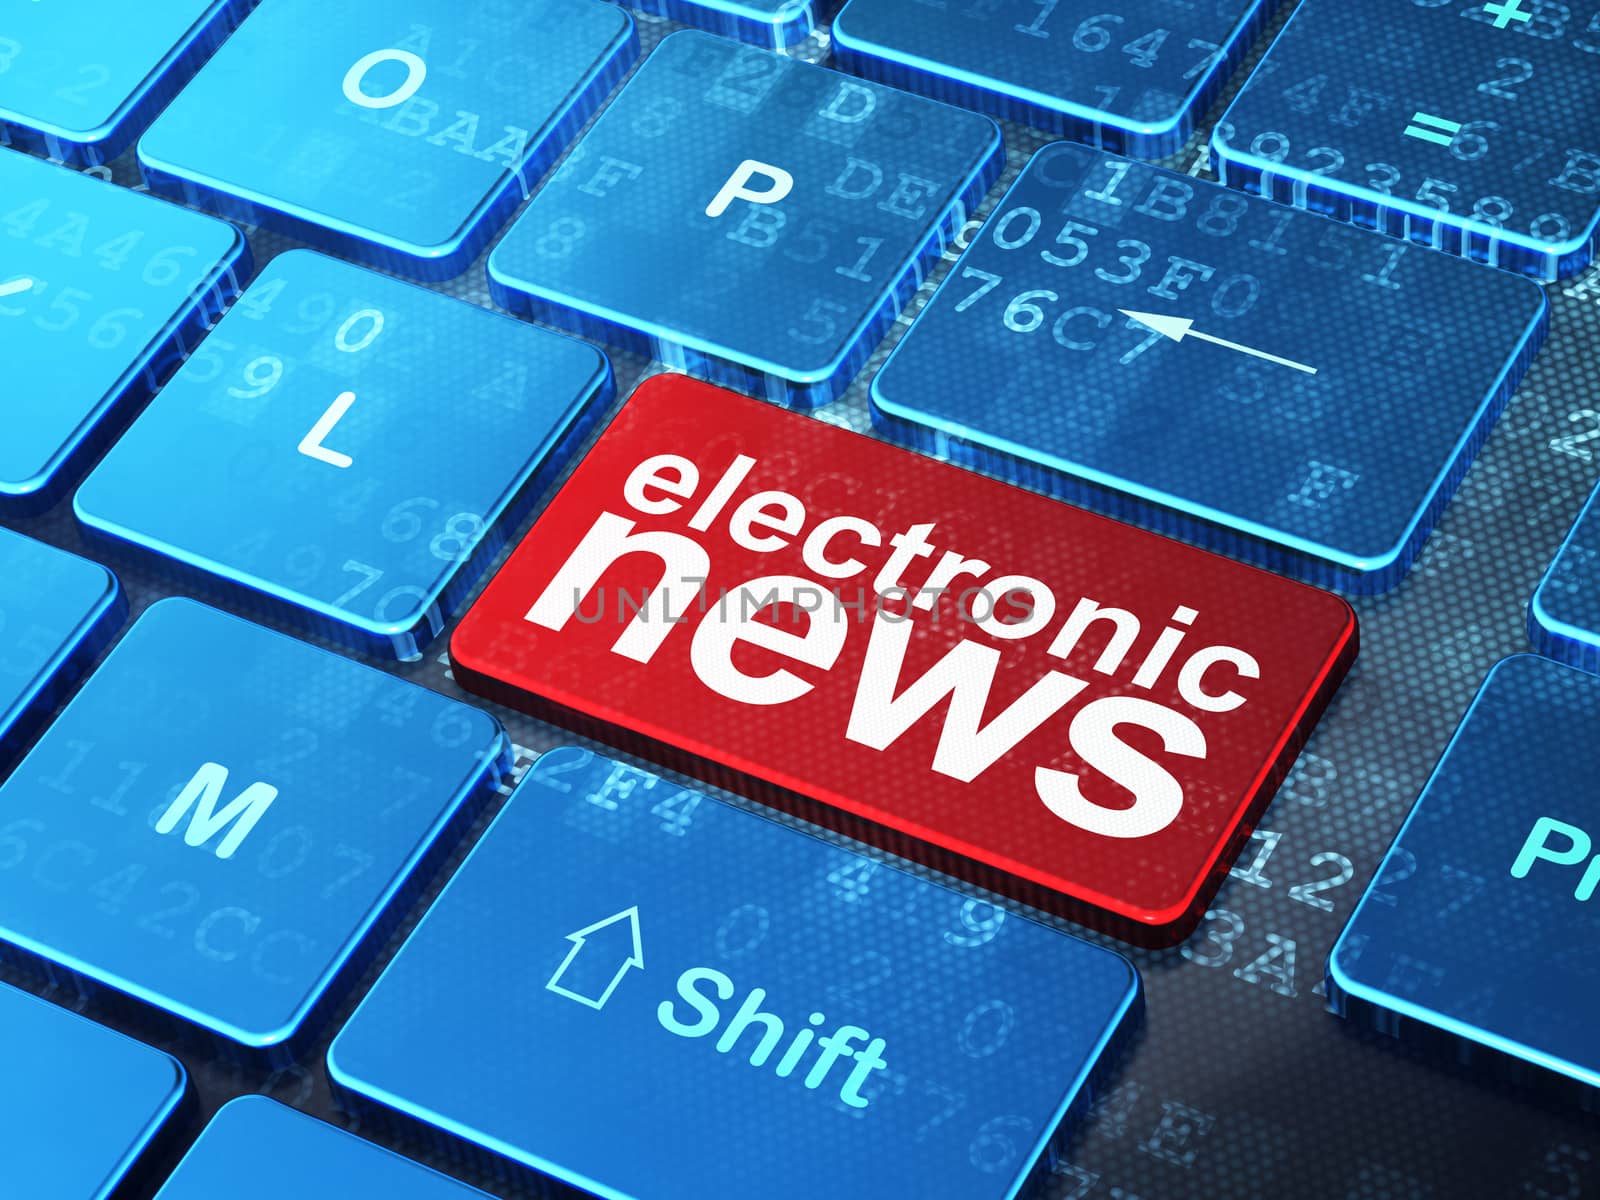 News concept: Electronic News on computer keyboard background by maxkabakov